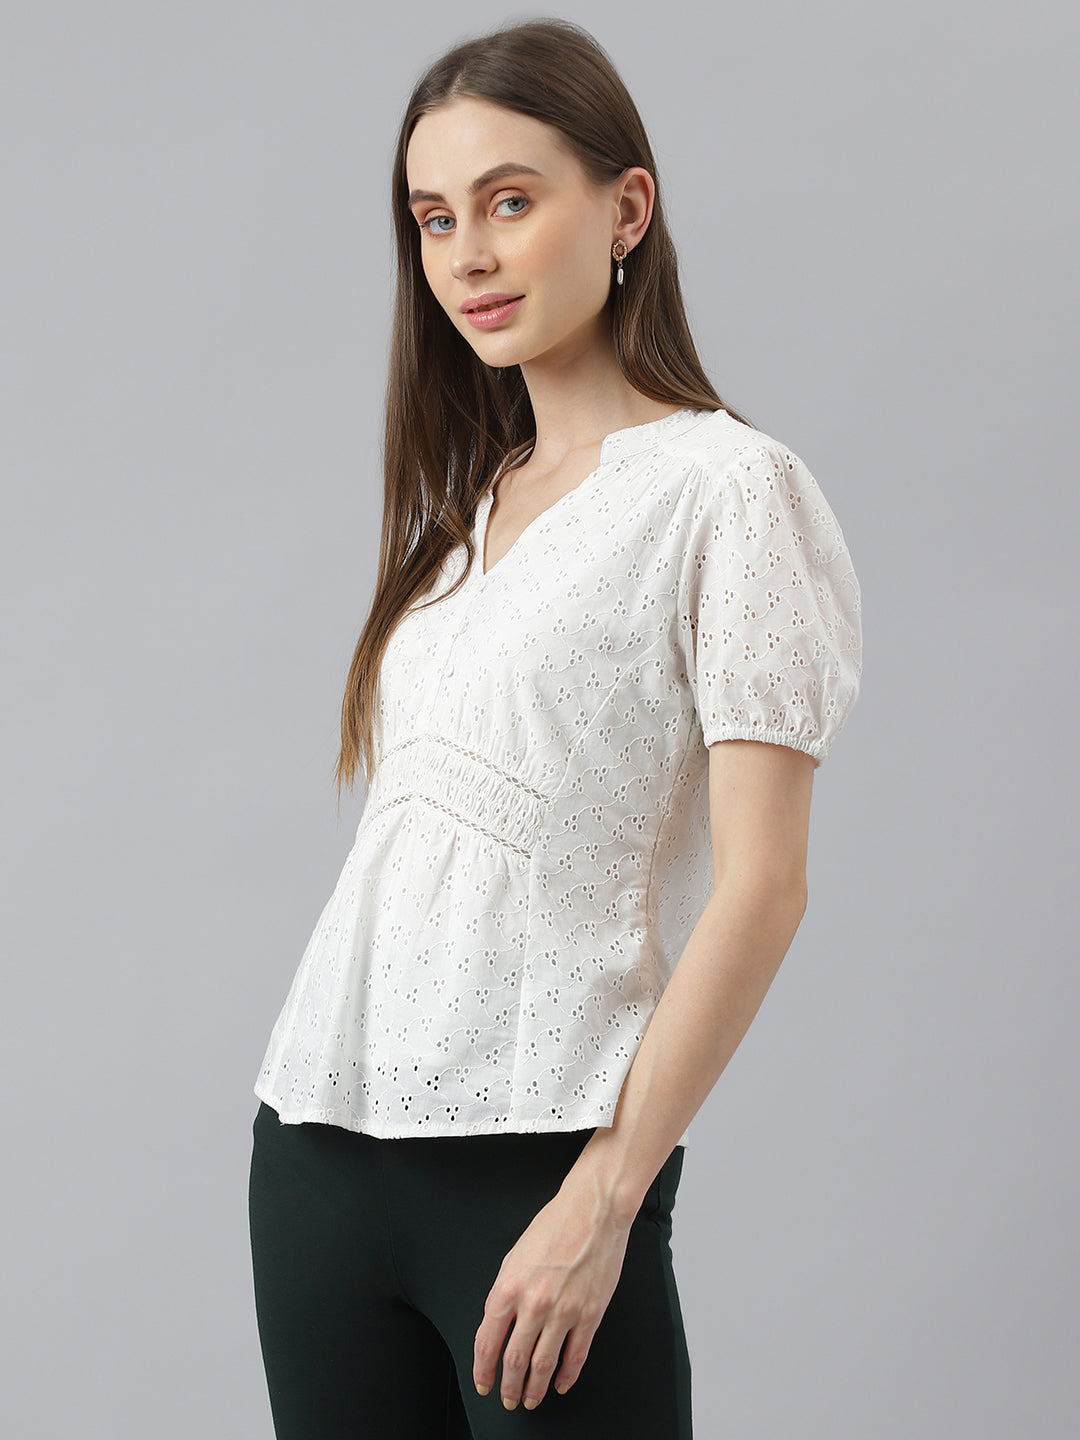 White Half Sleeves Solid Blouse Regular fit Top for Girls